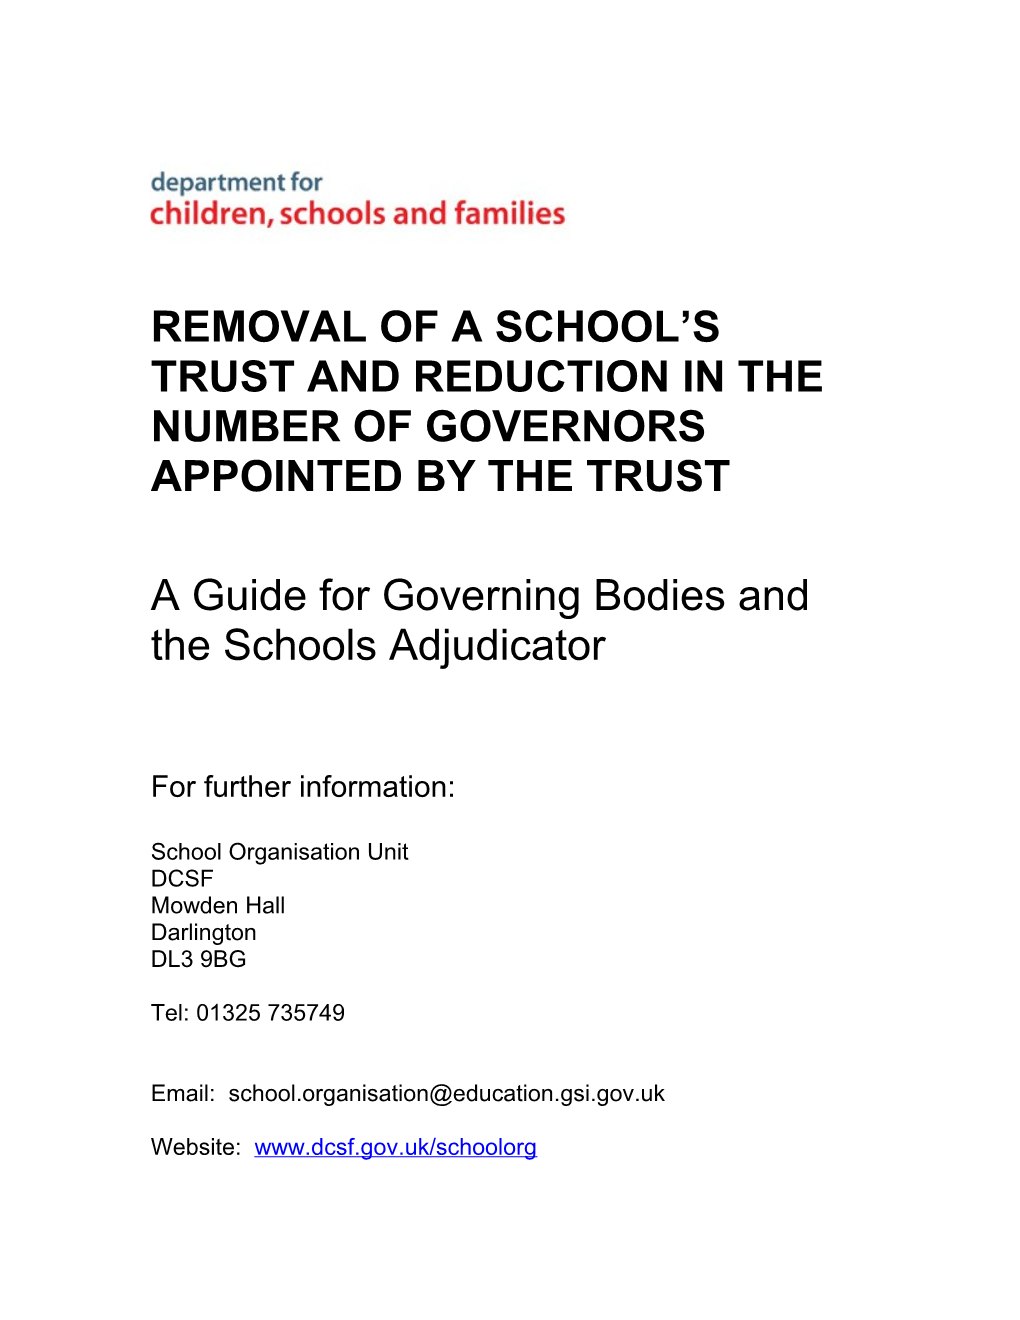 Guidance on Removal of a Trust Or Moving to a Minority of Trust Appointed Governors